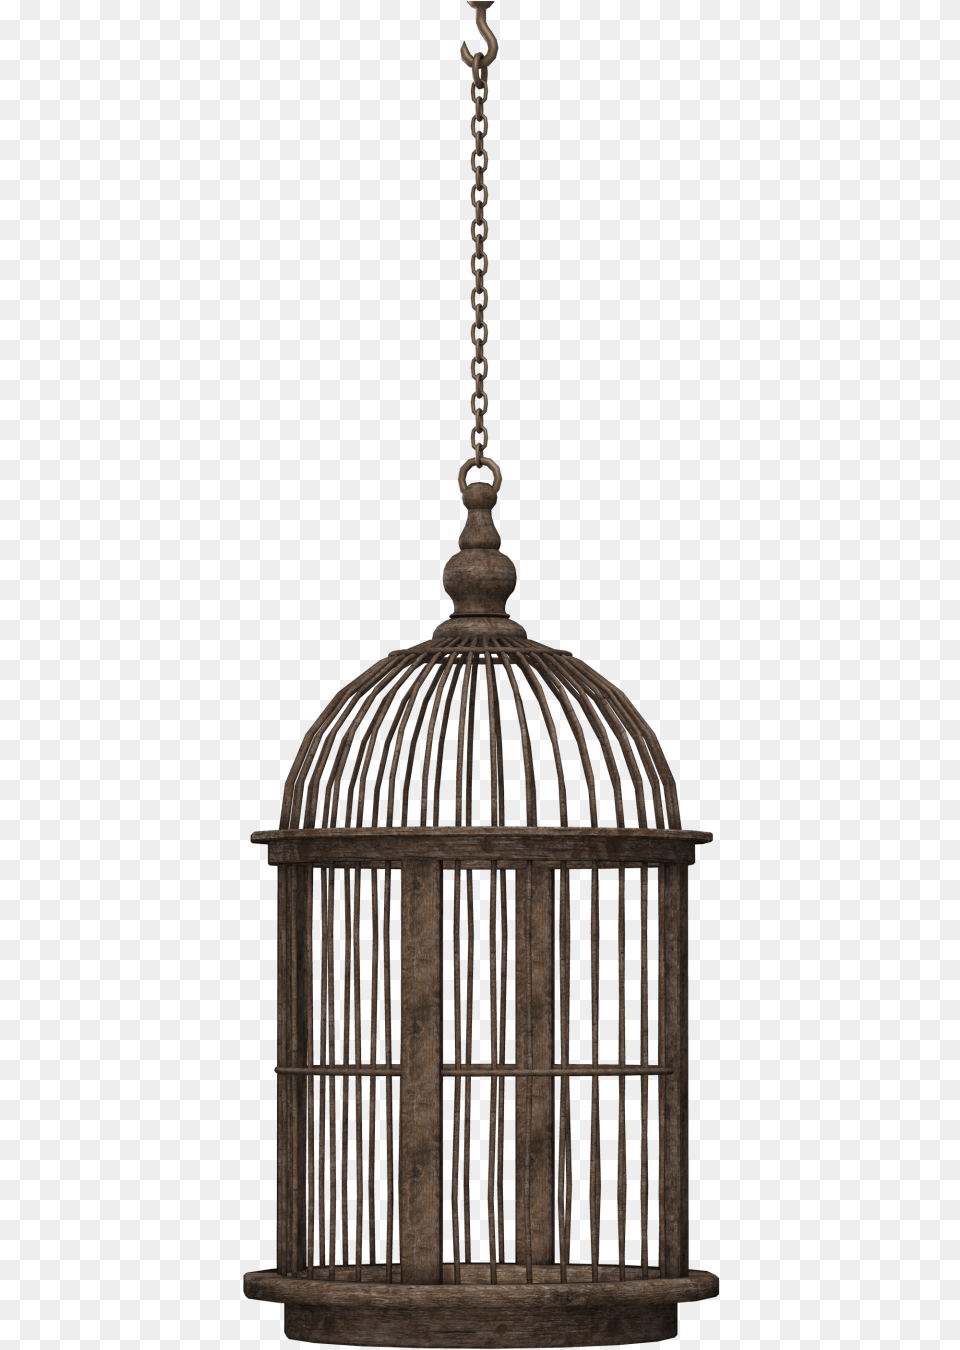 Bird Cage Image Bird Cages, Architecture, Building, Lamp Free Transparent Png